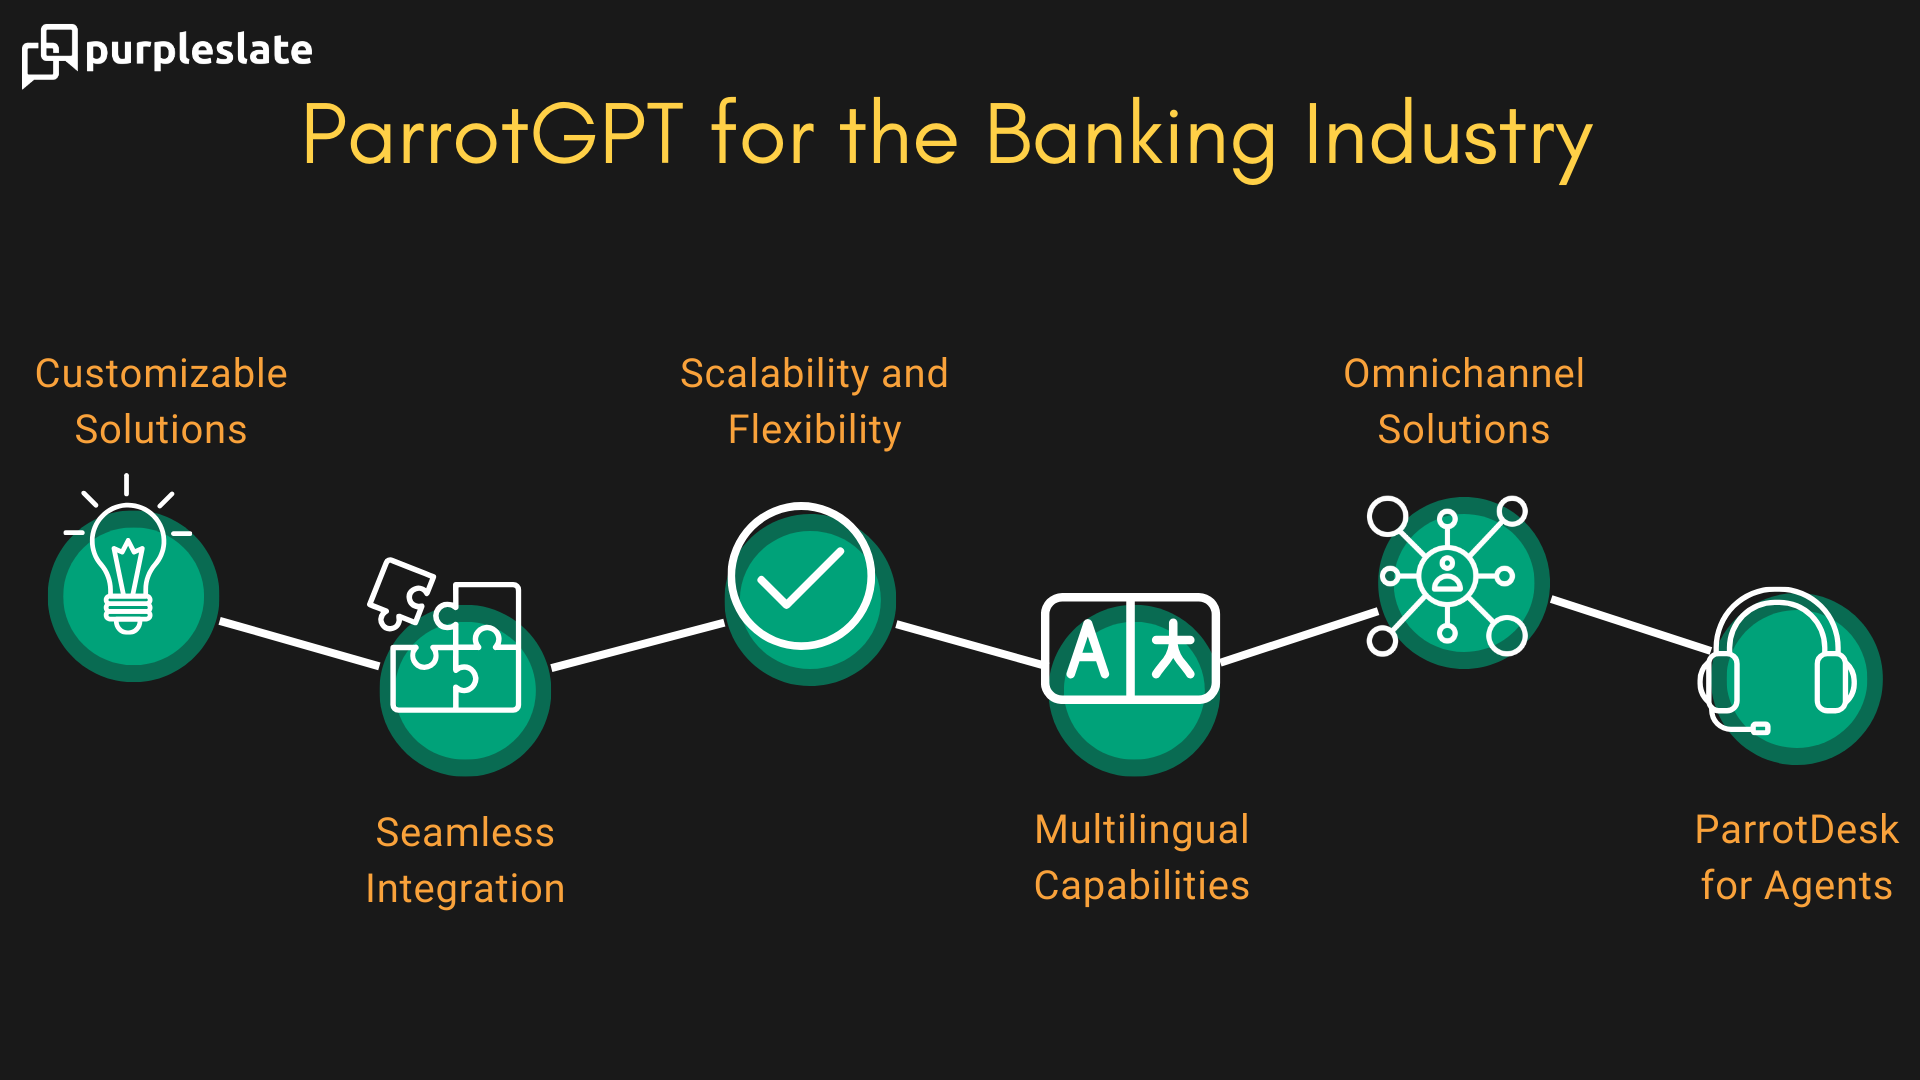 ParrotGPT for the Banking Industry